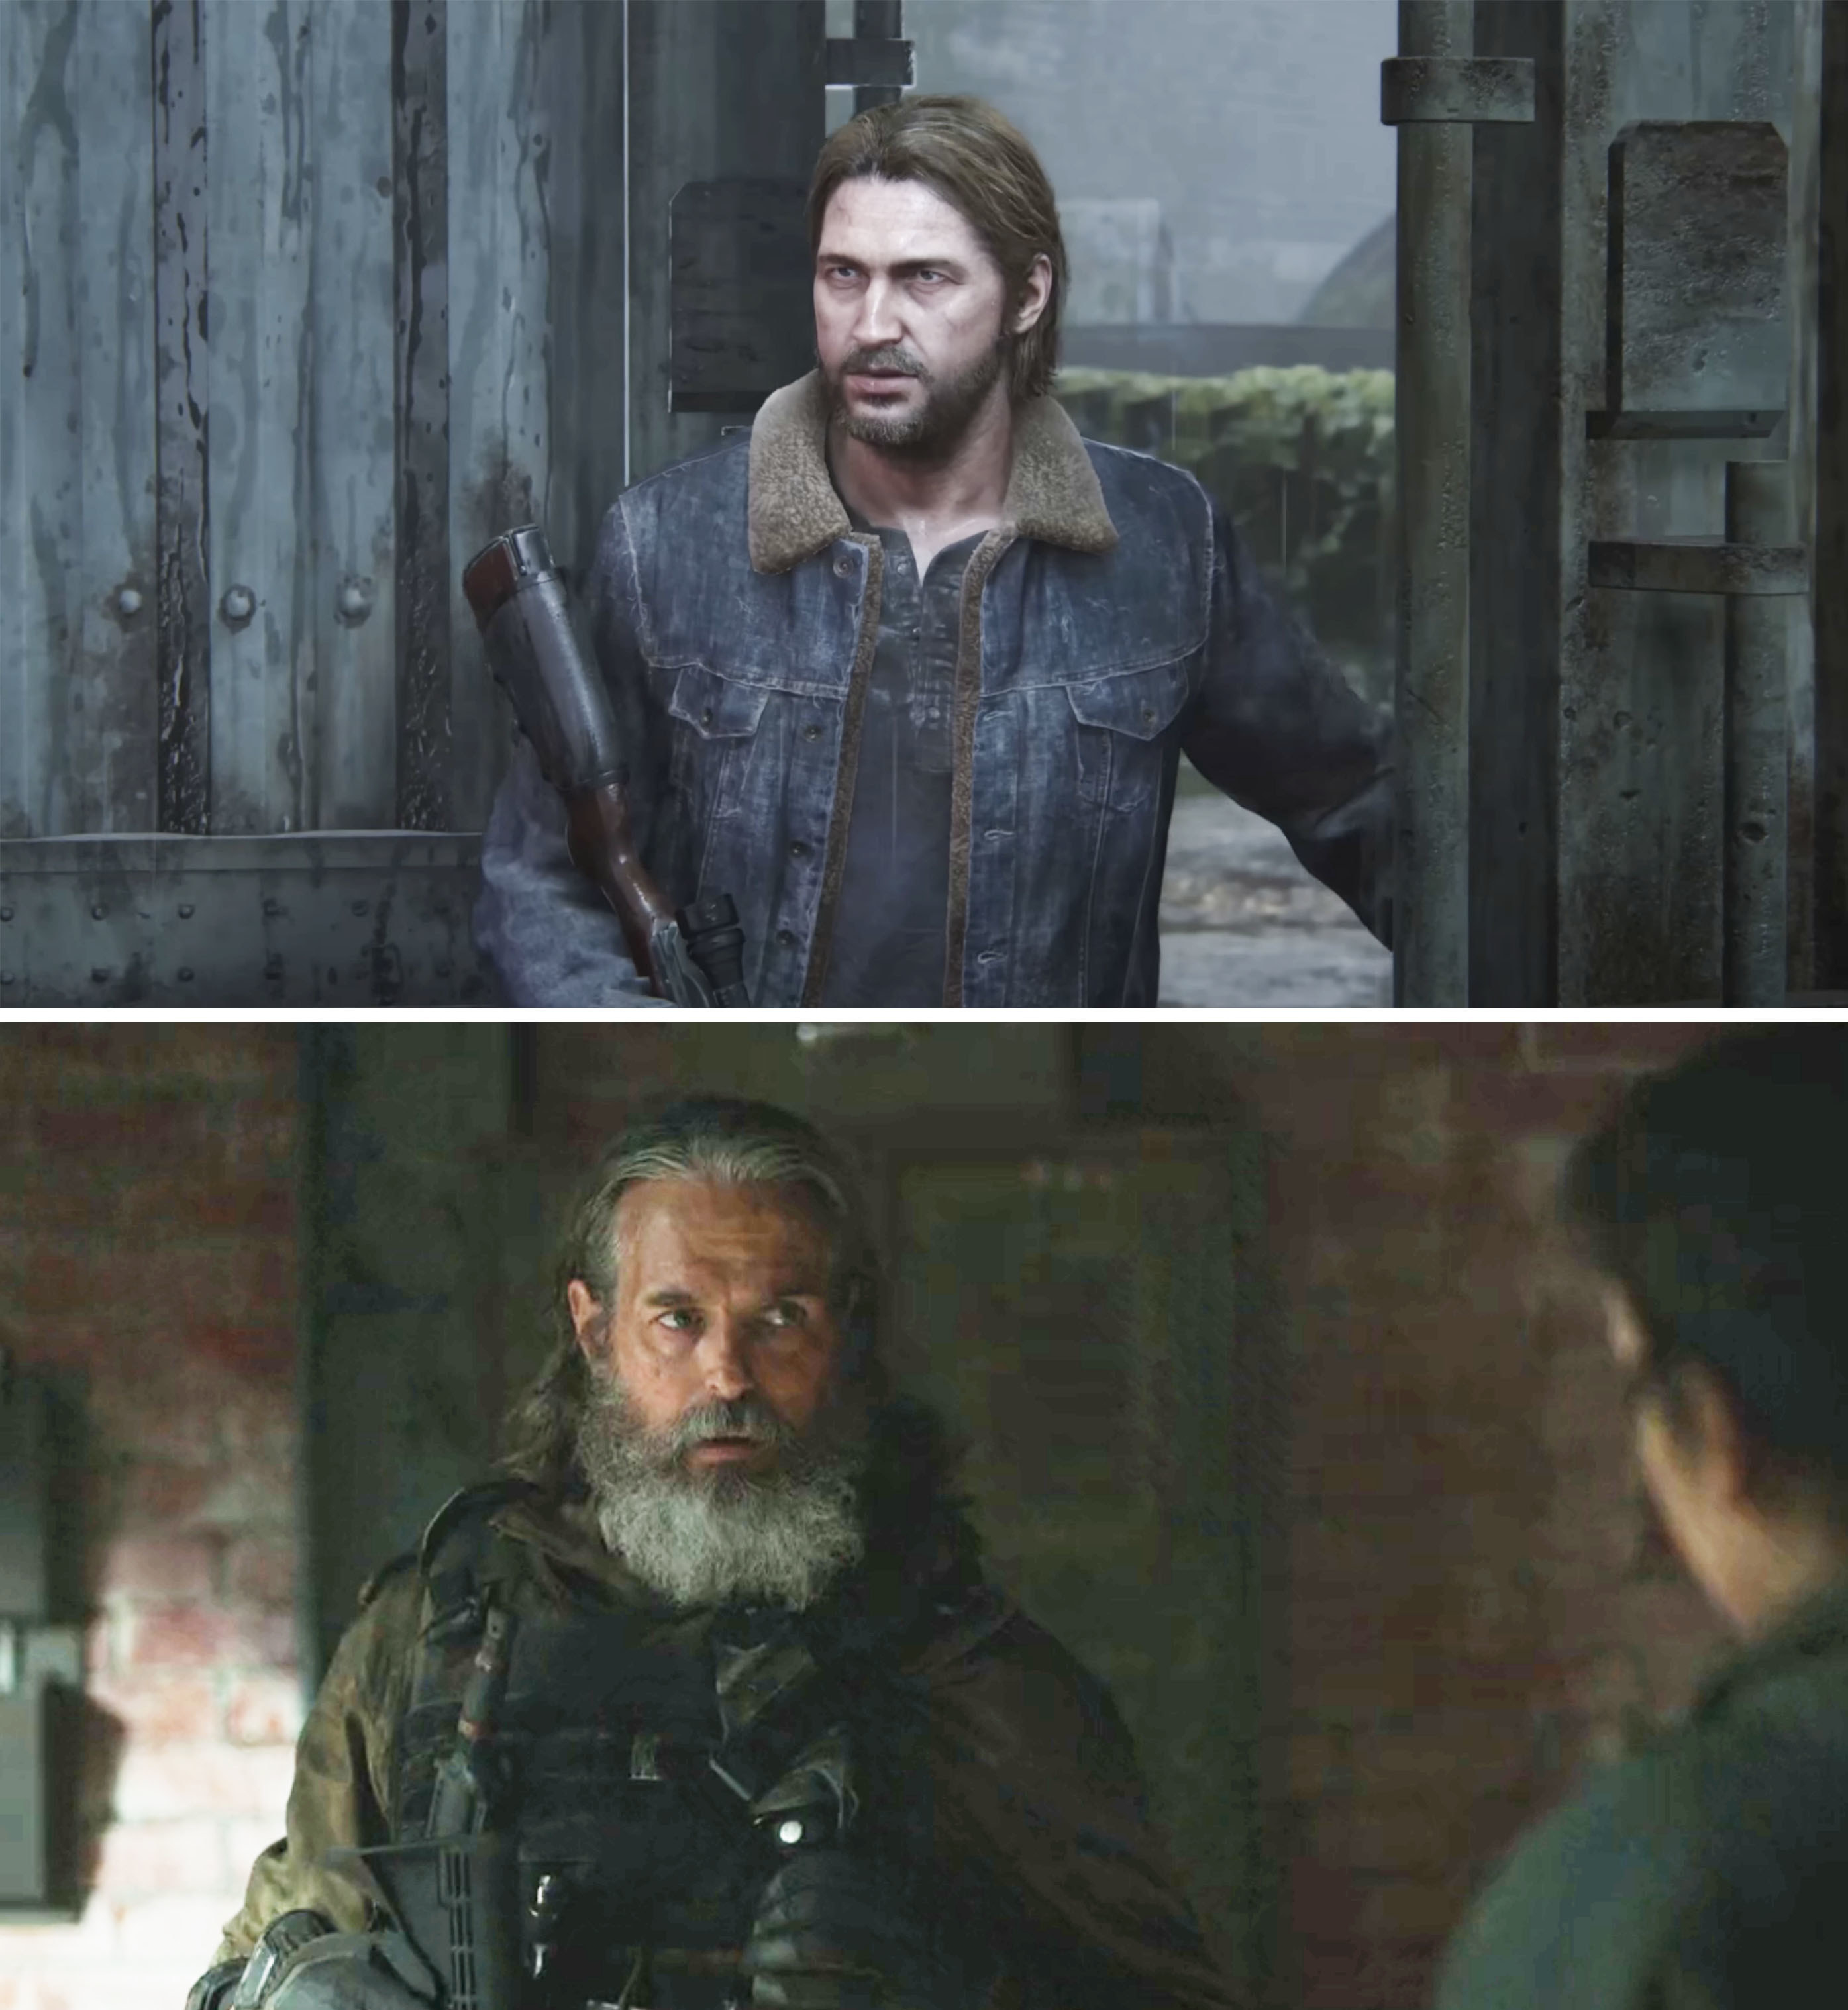 Screen grabs from &quot;The Last of Us&quot; video game and series